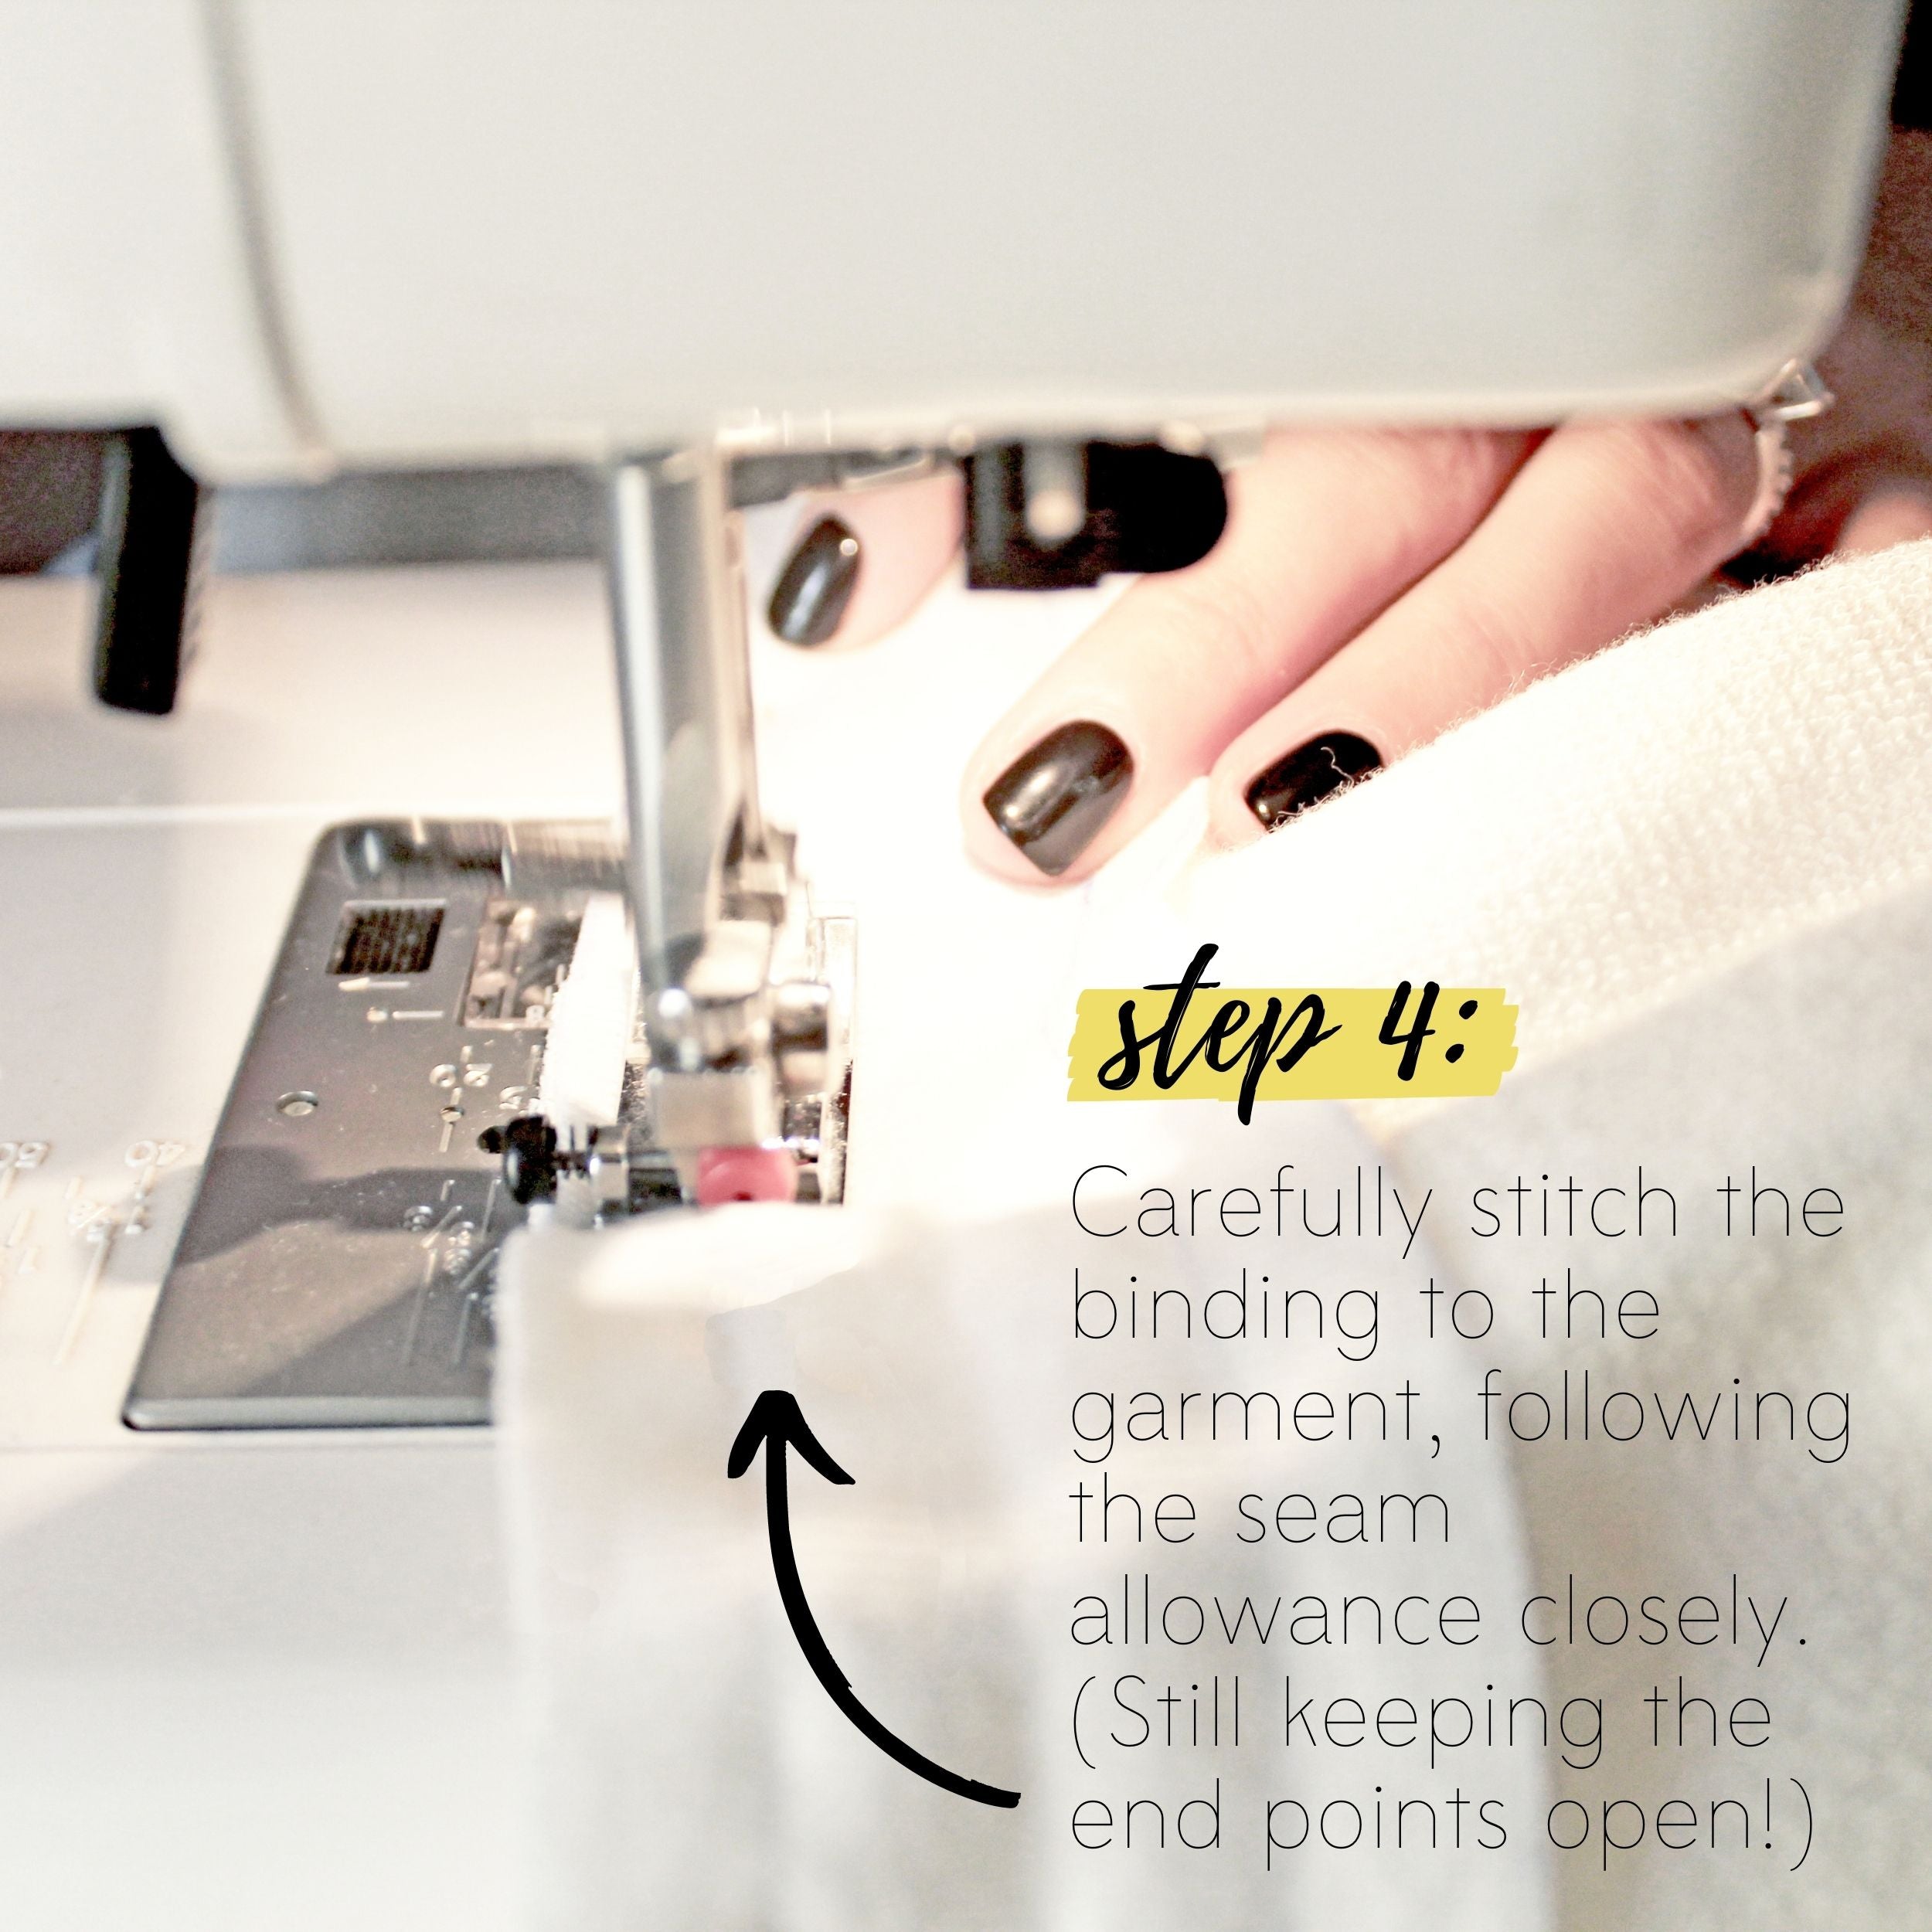 How To Sew A Knit Seam Binding Sewing Tutorial: Step 4